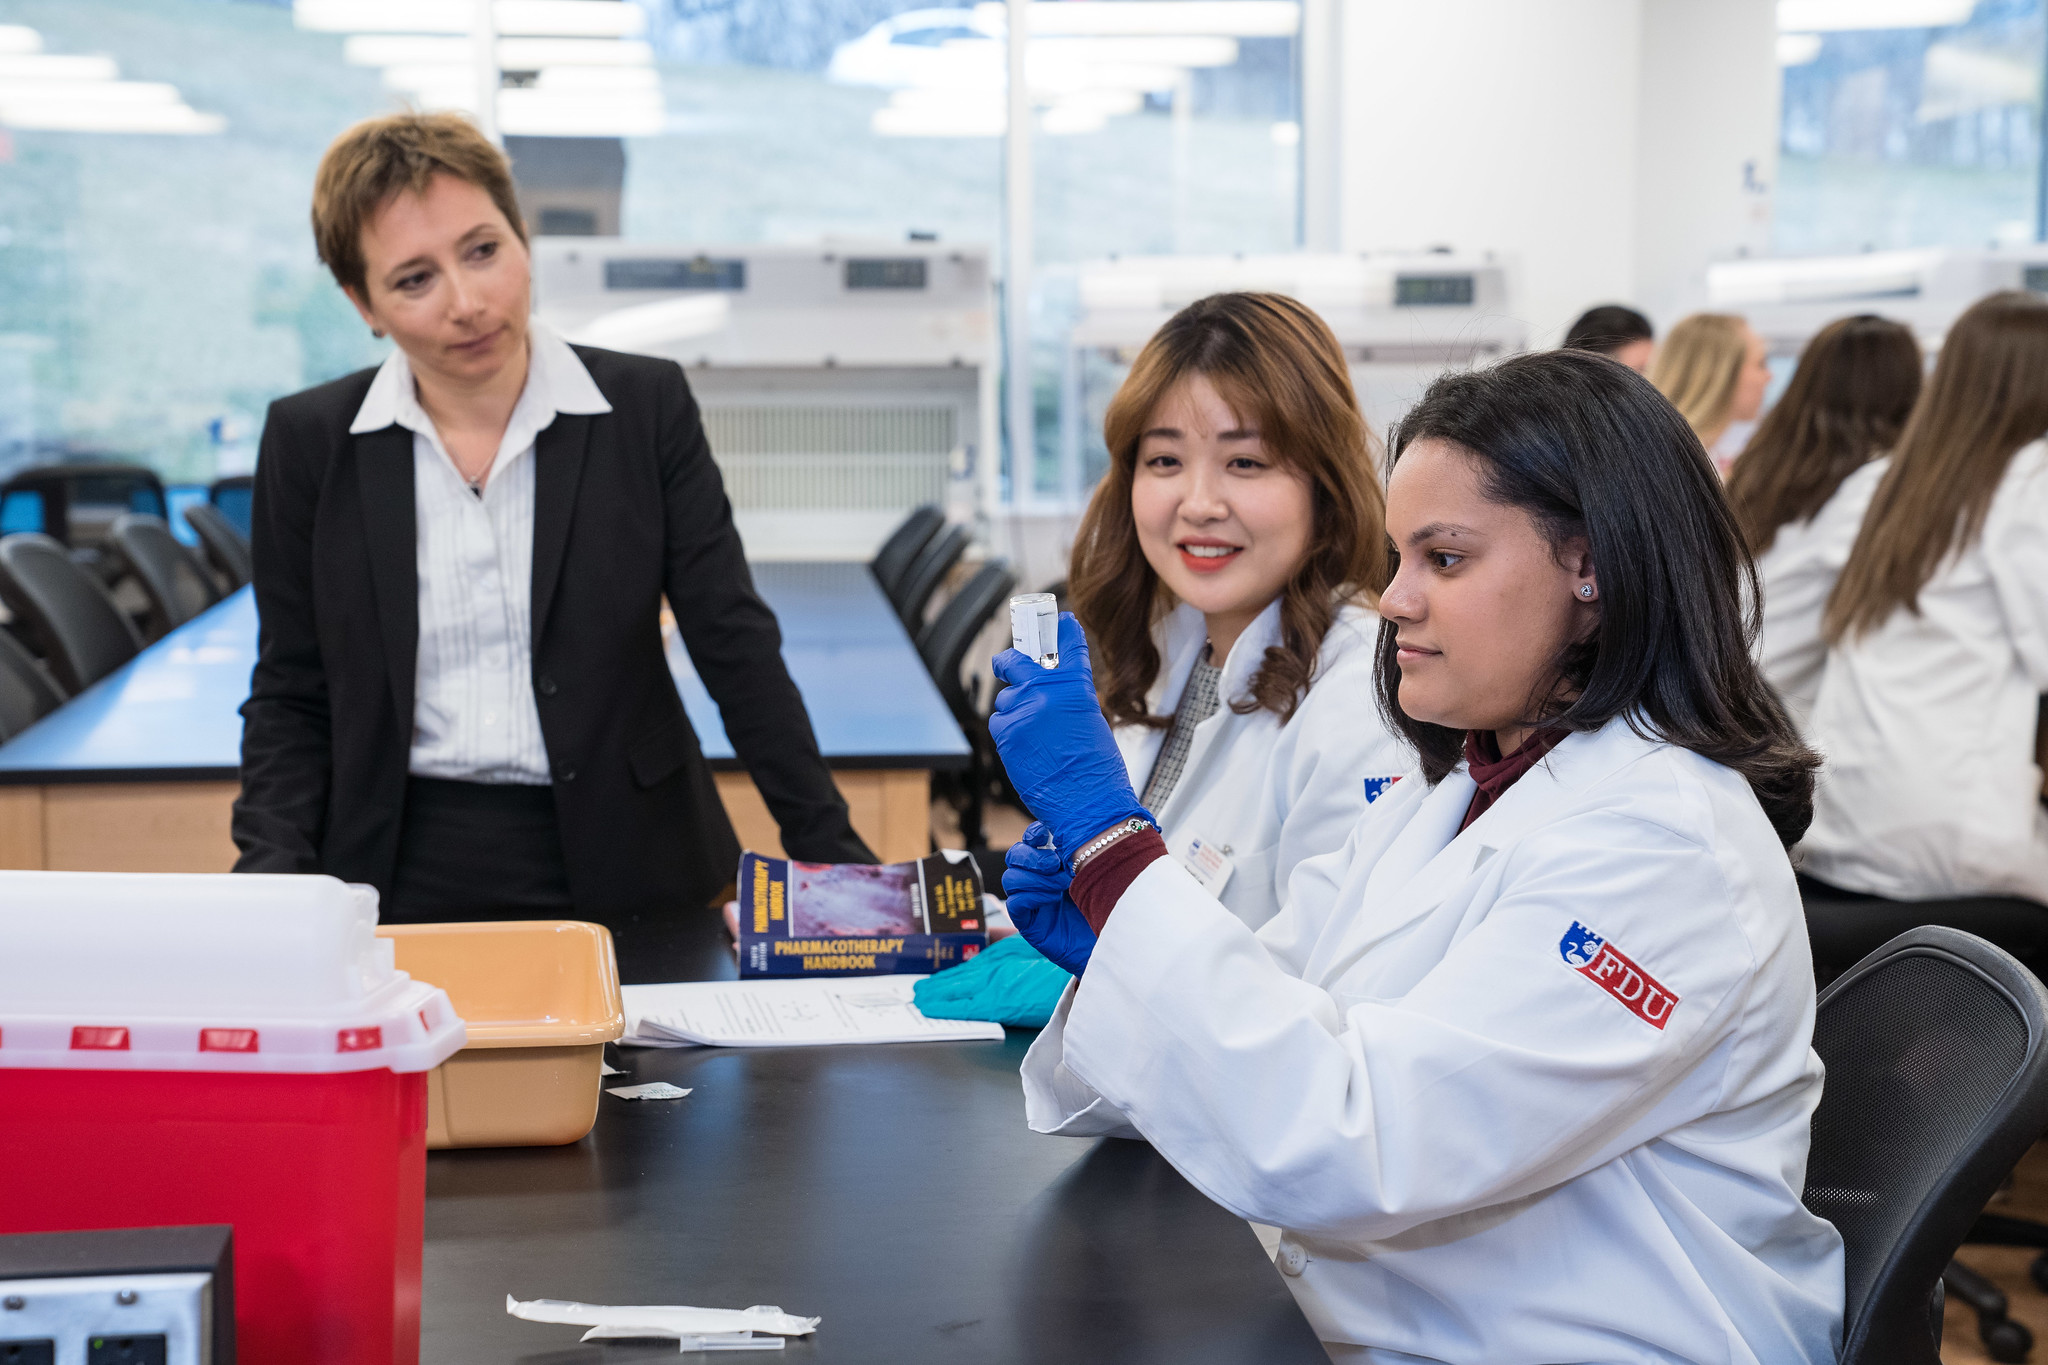 A female professor watches a pharmacy student wearing a lab coat practice drawing medication into a syringe.